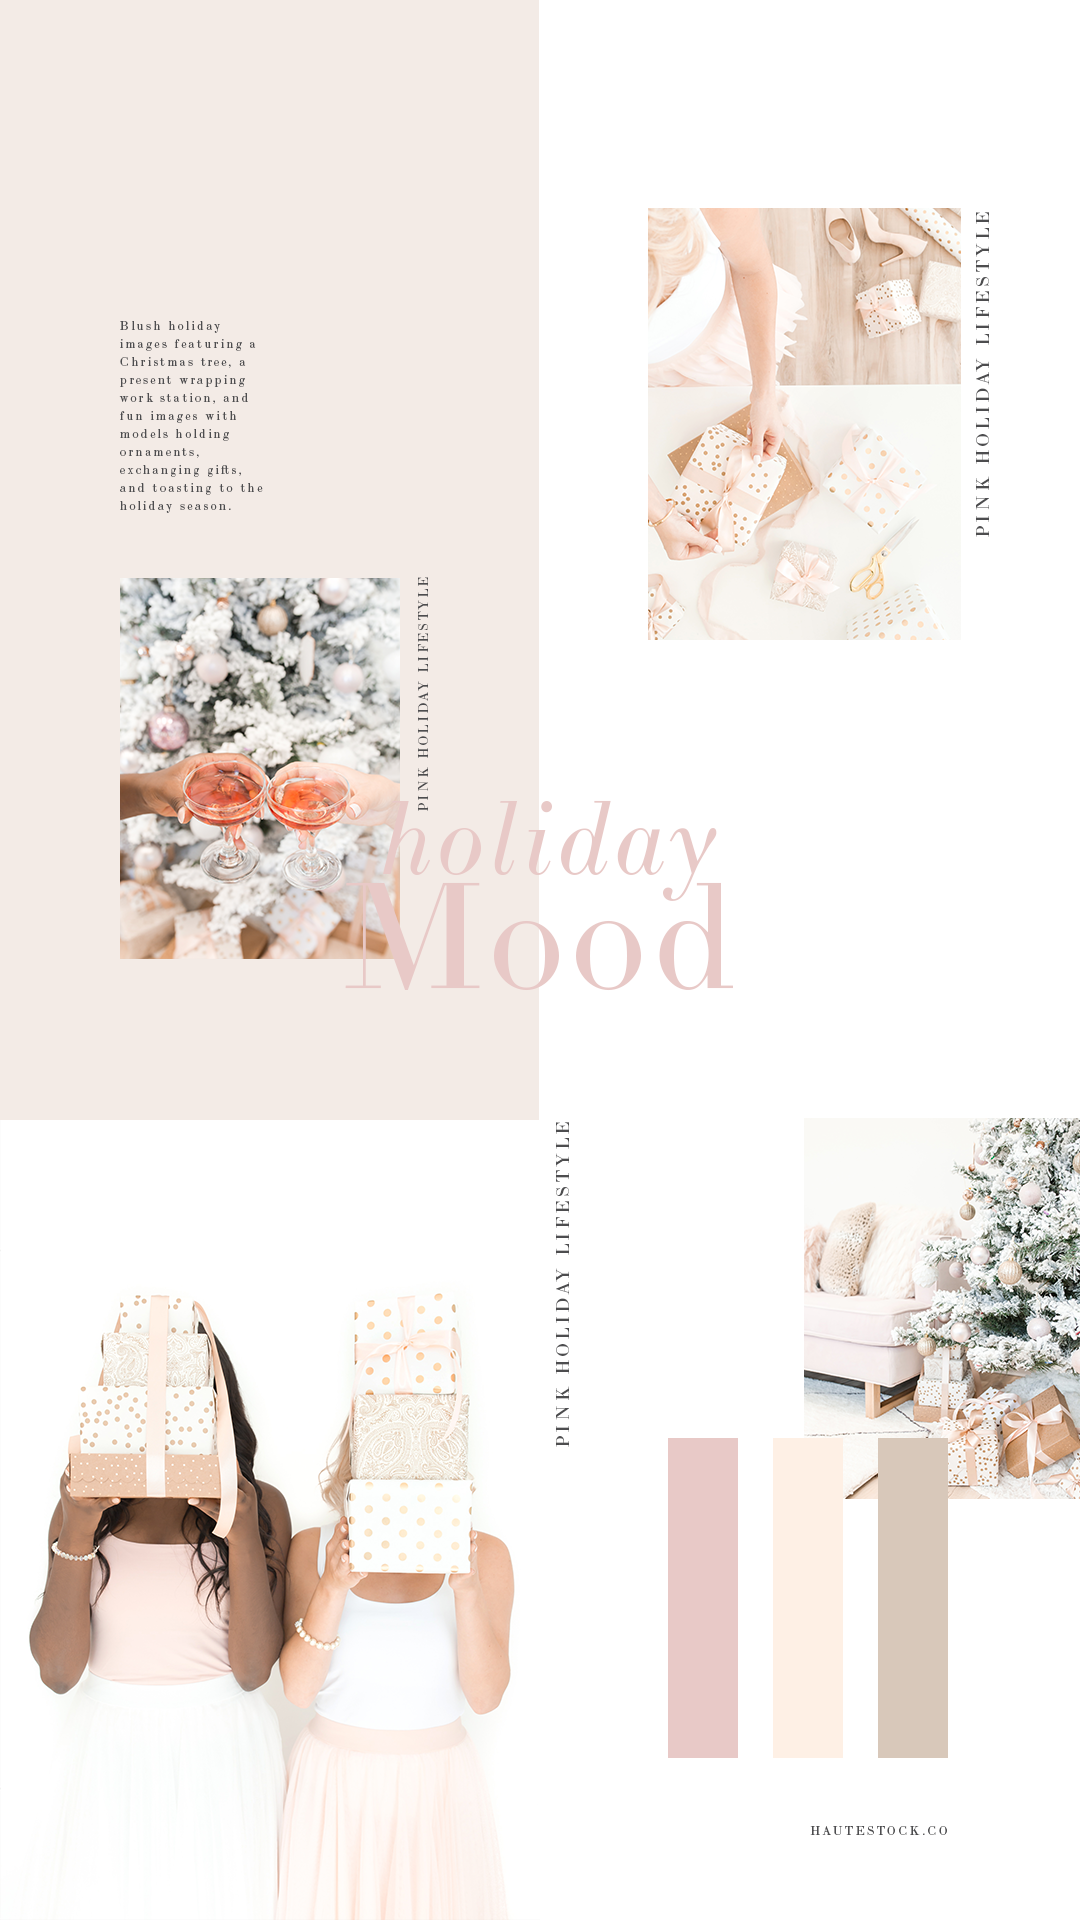 Blush holiday images featuring a Christmas tree, a present wrapping work station, and fun images with models holding ornaments, exchanging gifts, and toasting to the holiday season.